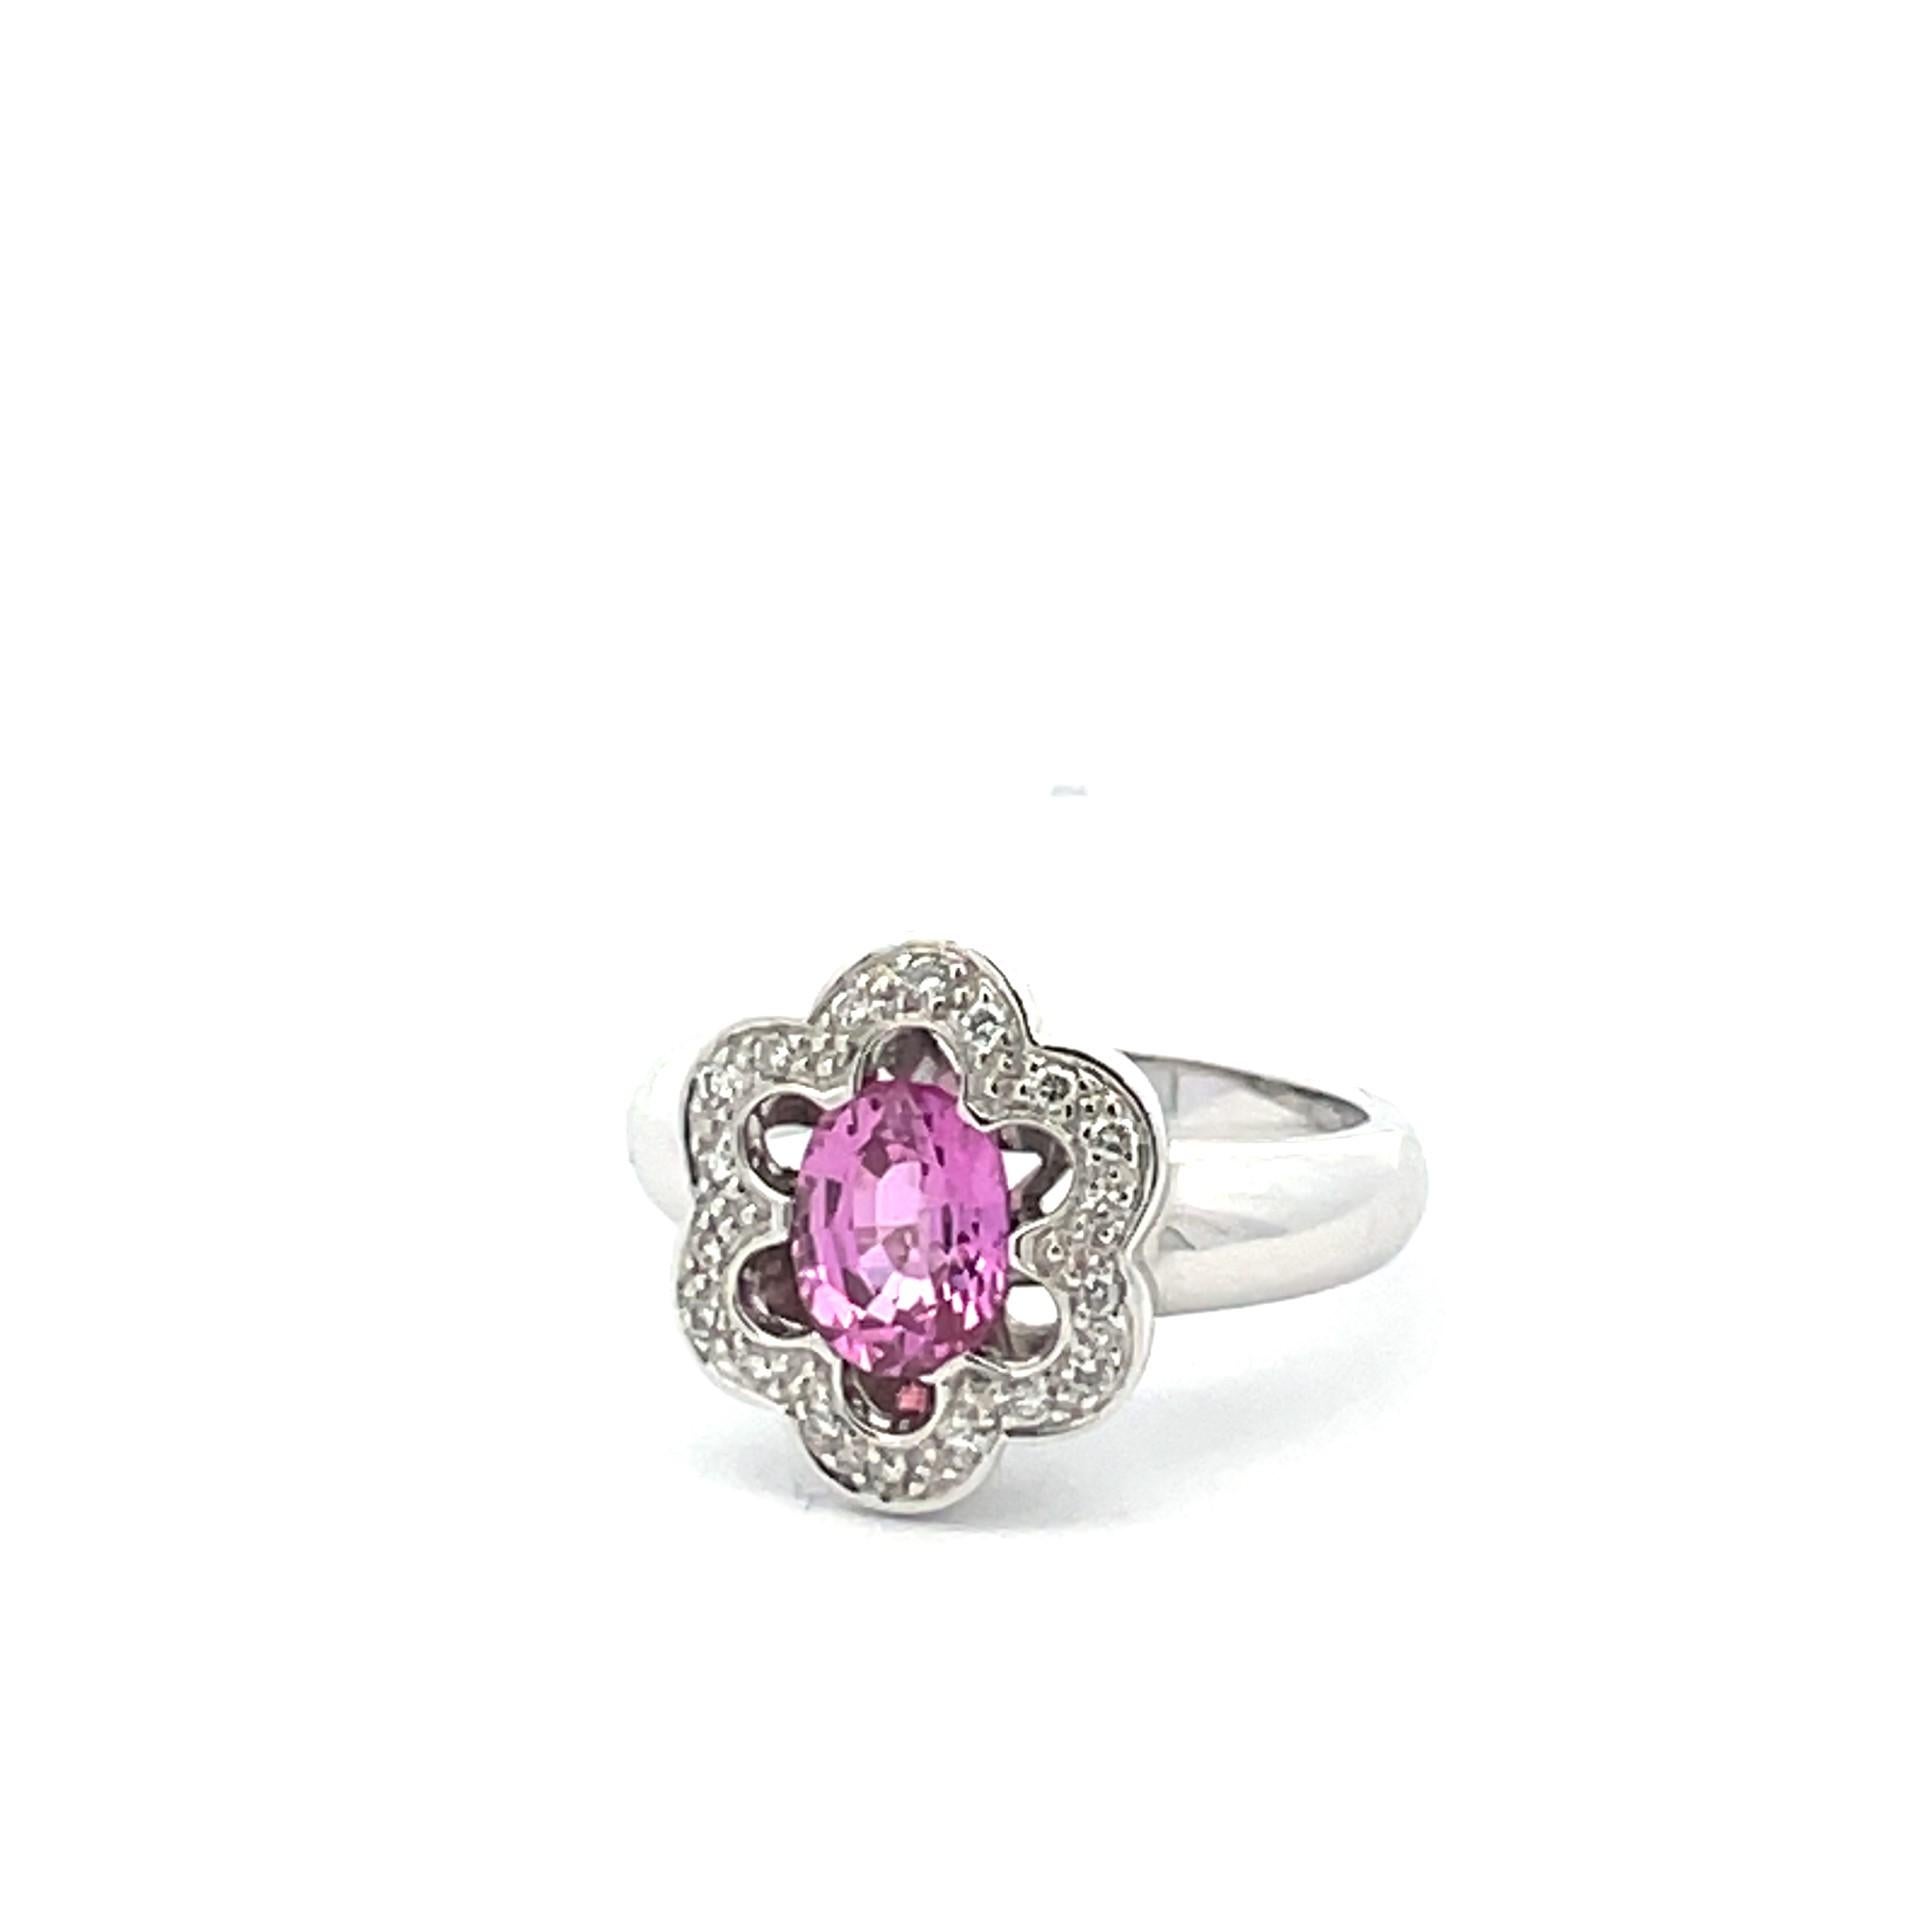 Blooming with sophistication this solitaire flower ring with natural pink sapphire center, natural white diamonds scalloped halo in 18kt white gold.

1 natural pink sapphire 1.52ct total weight

12 brilliant cut natural diamonds 0.84ct total